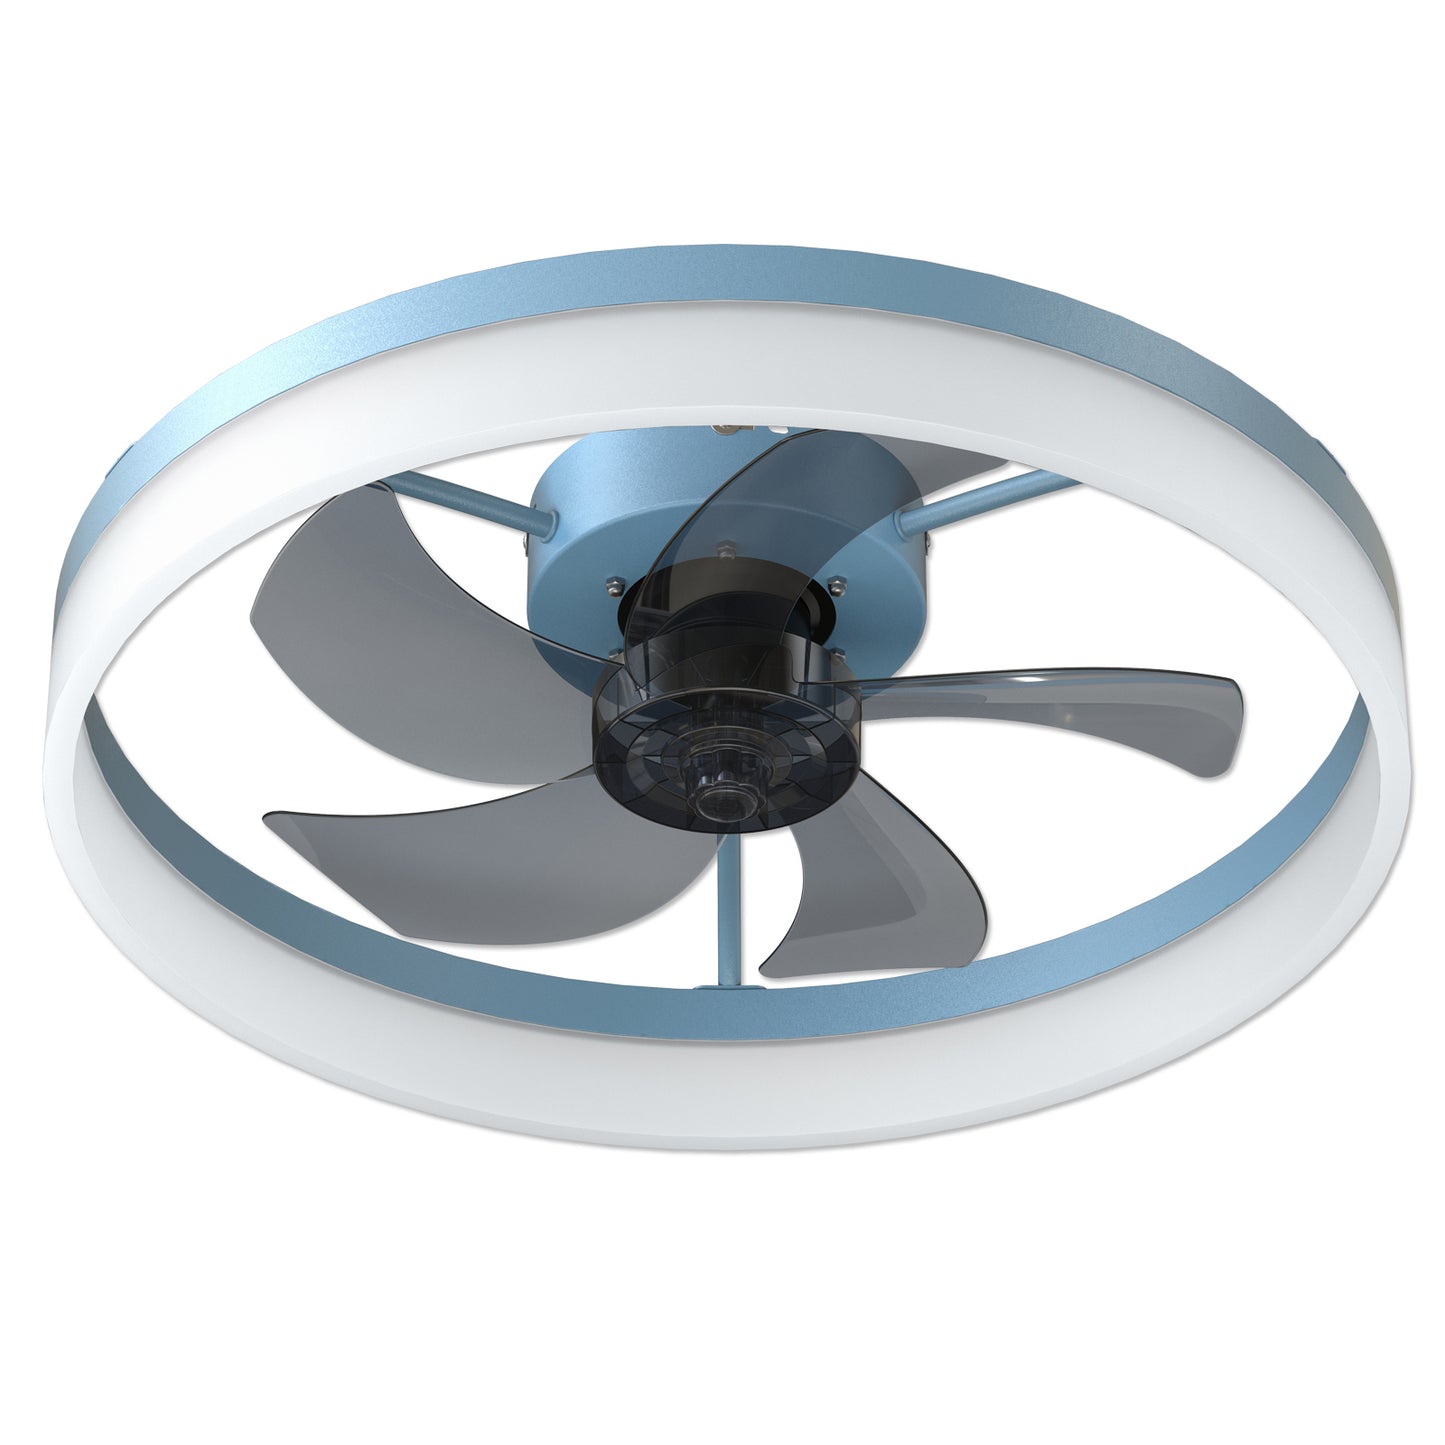 a ceiling fan with a blue and white design